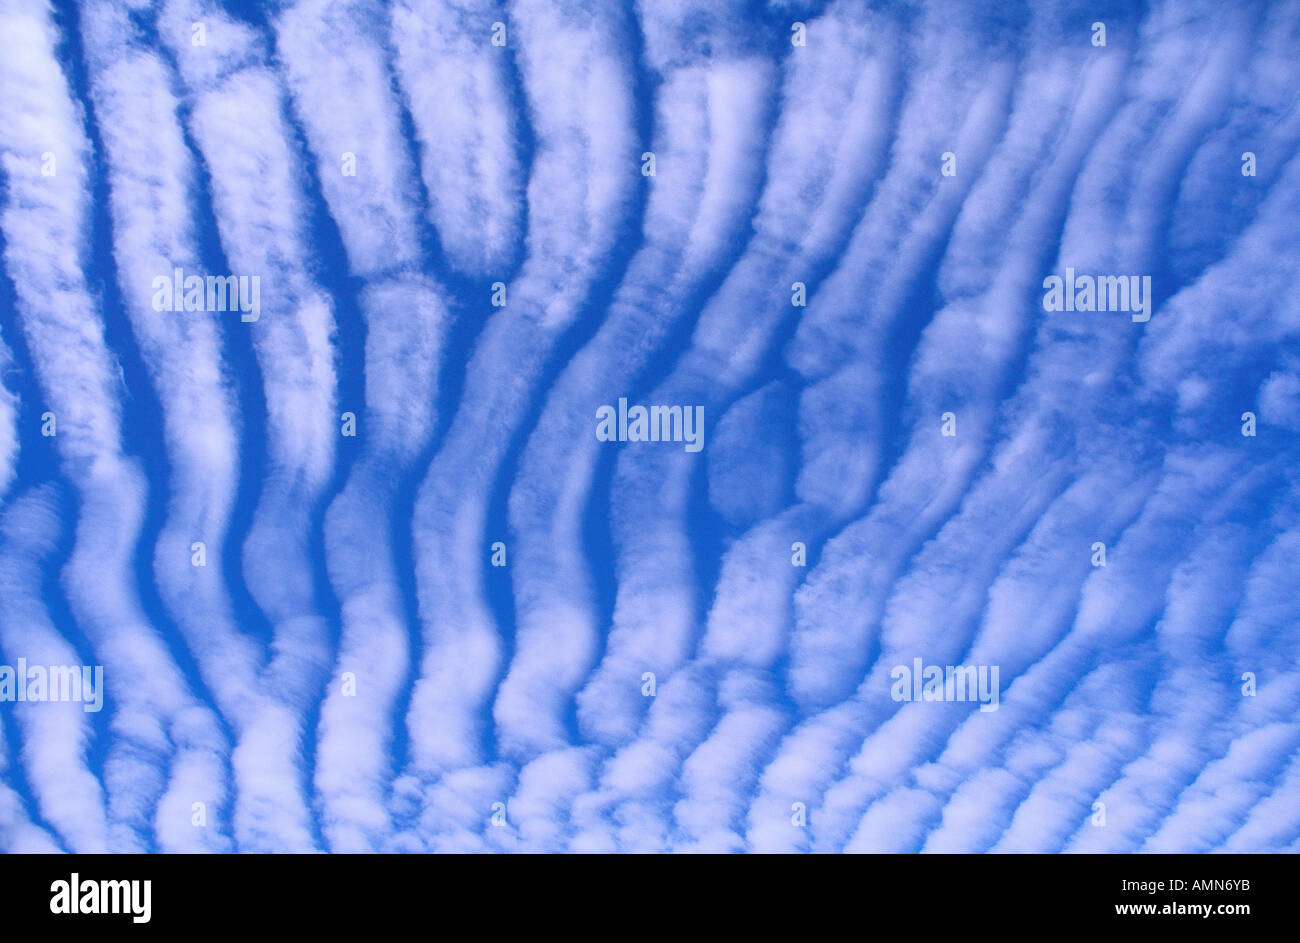 Cloud Patterns, Bowesdorp, South Africa Stock Photo